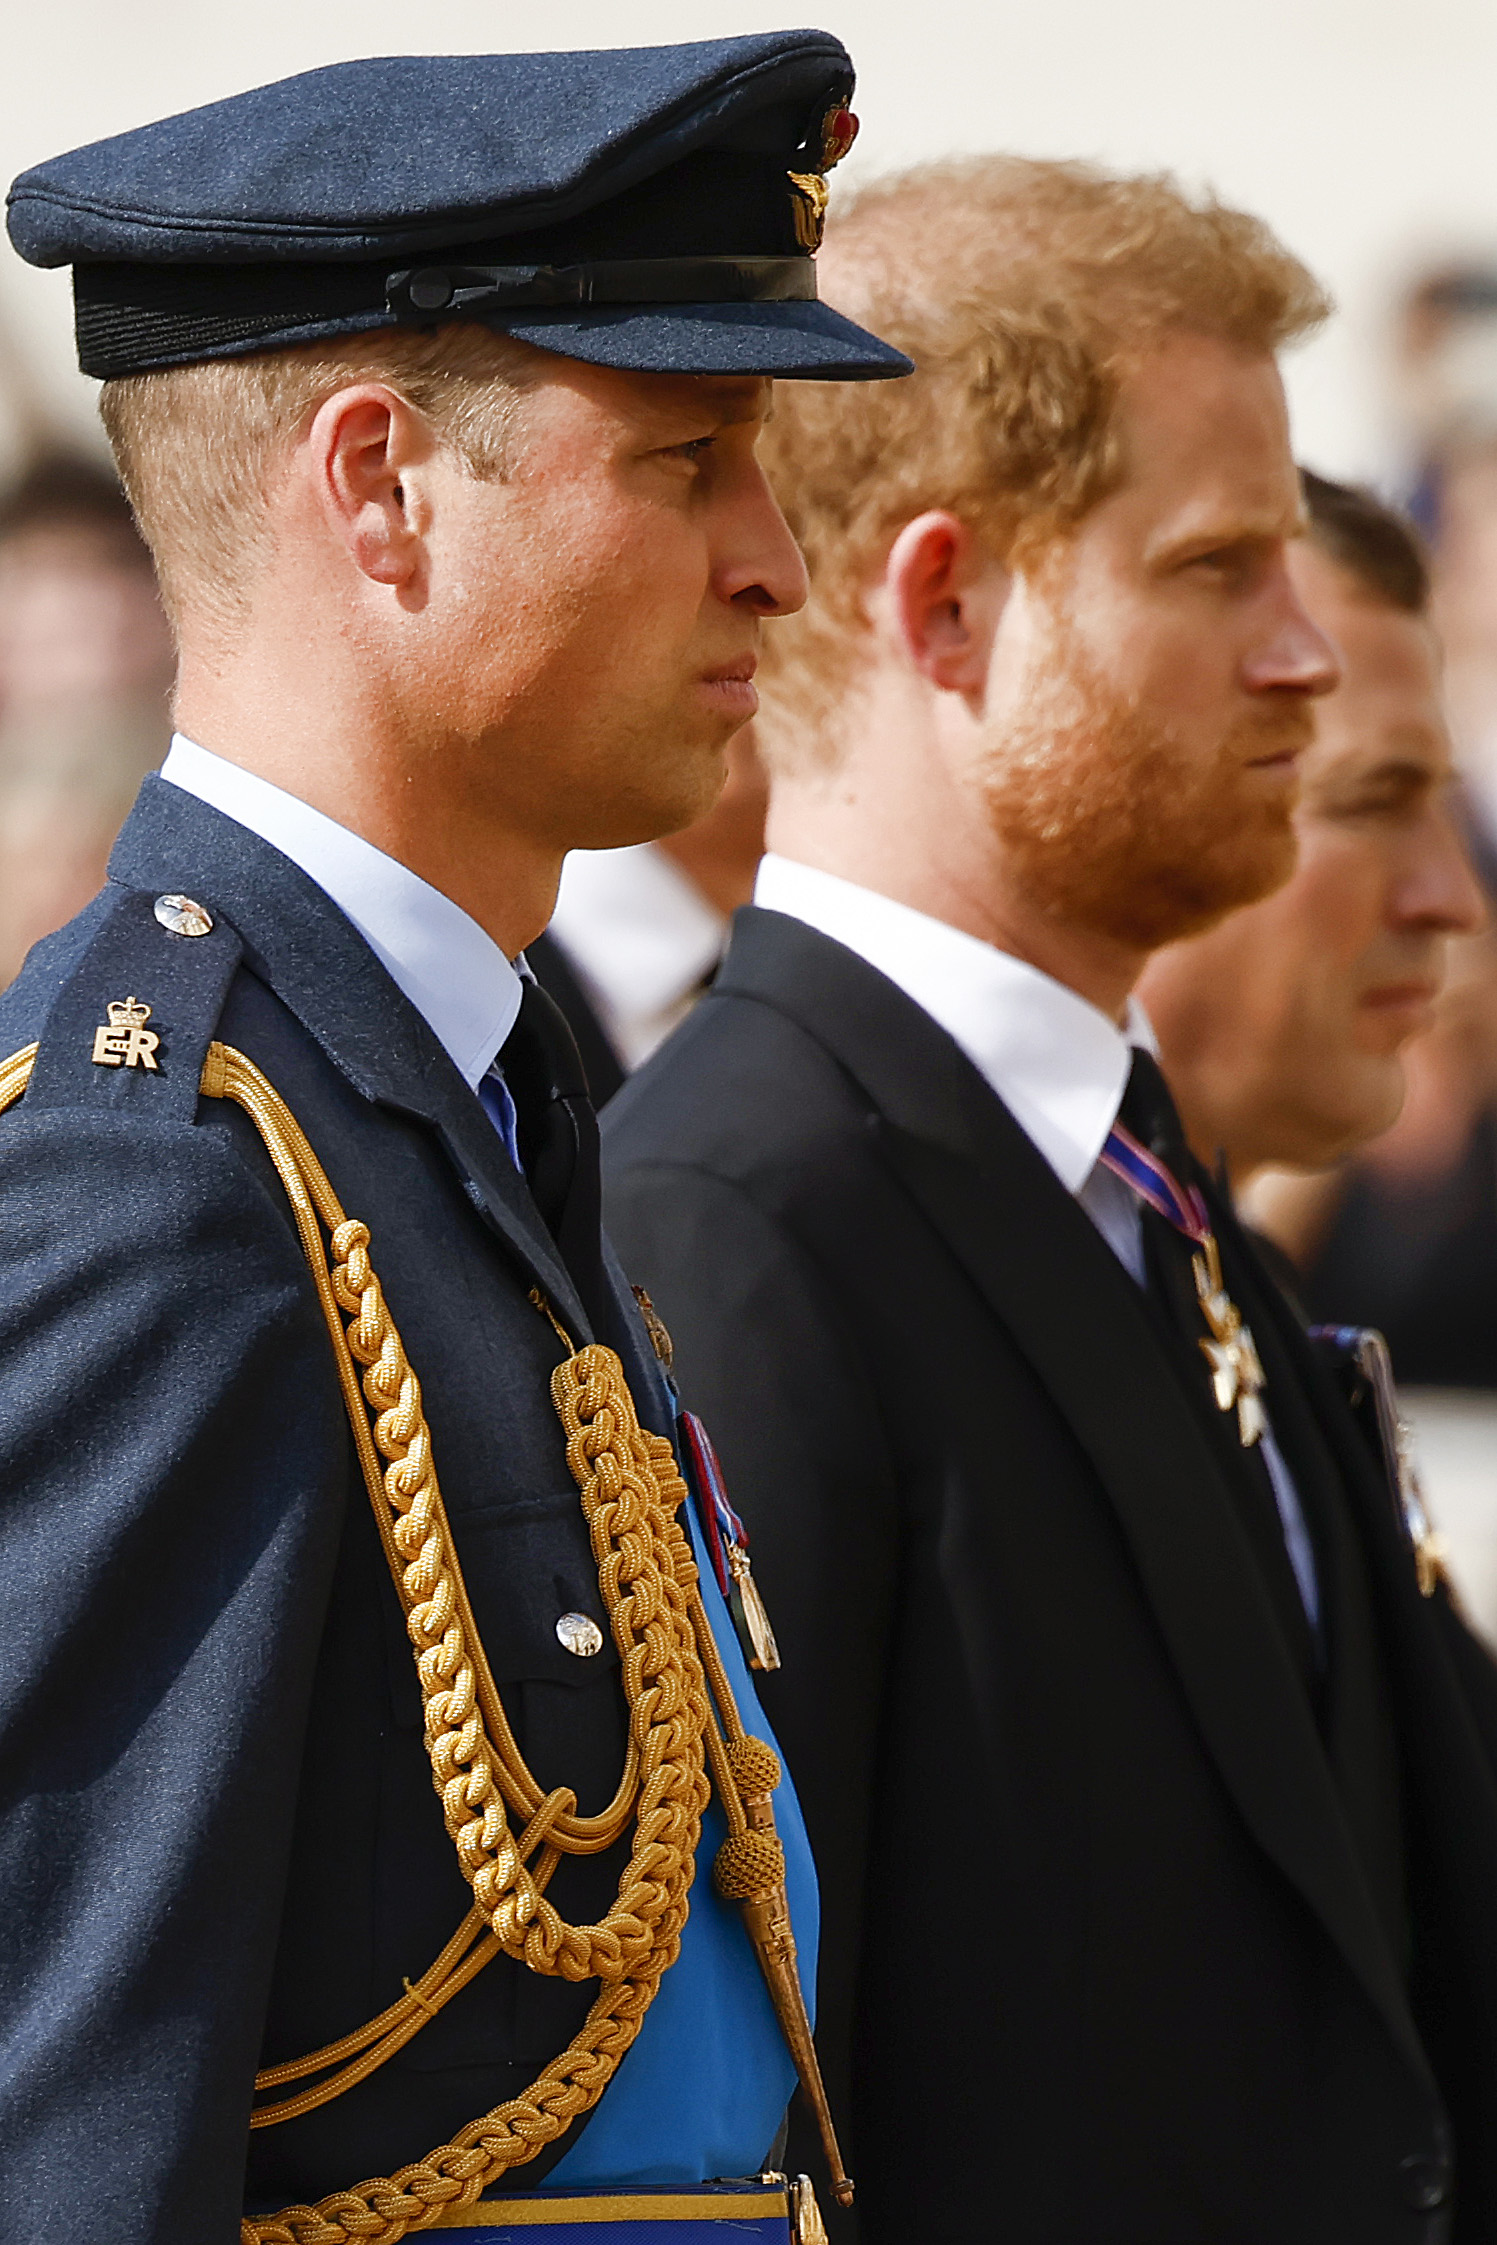 Prince William and Prince Harry (Image: Getty Images)